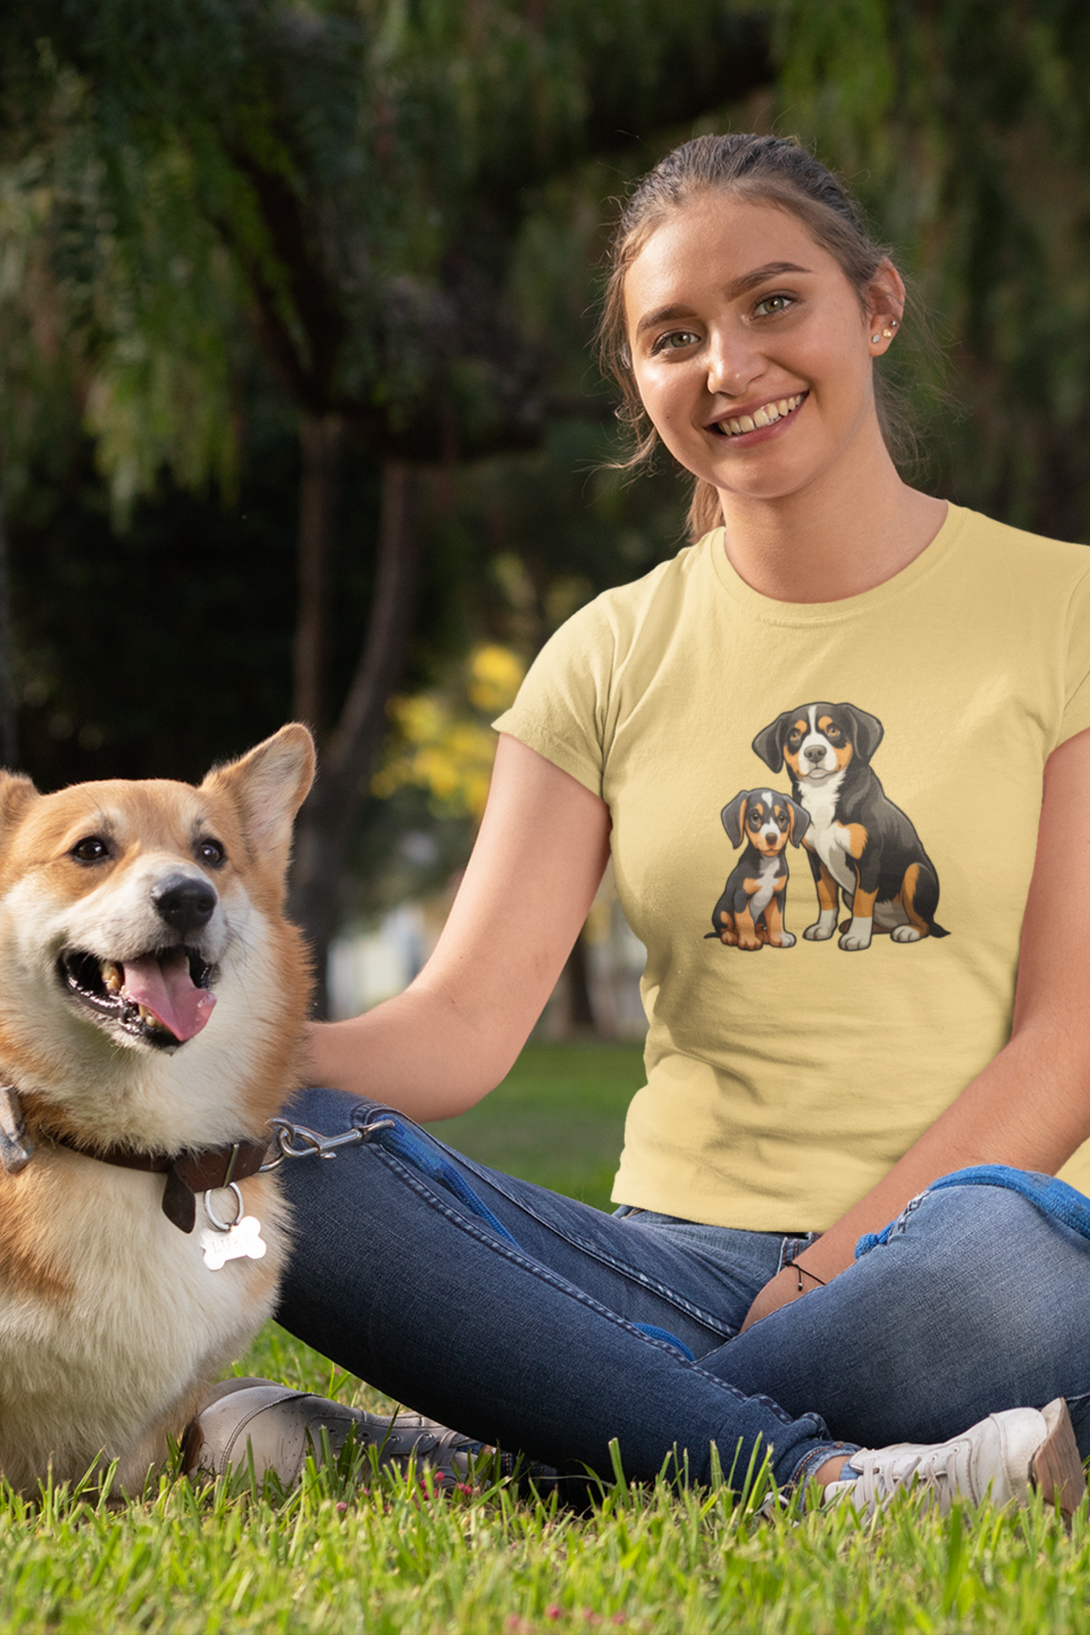 Puppy And Dog Printed T-Shirt For Women - WowWaves - 4